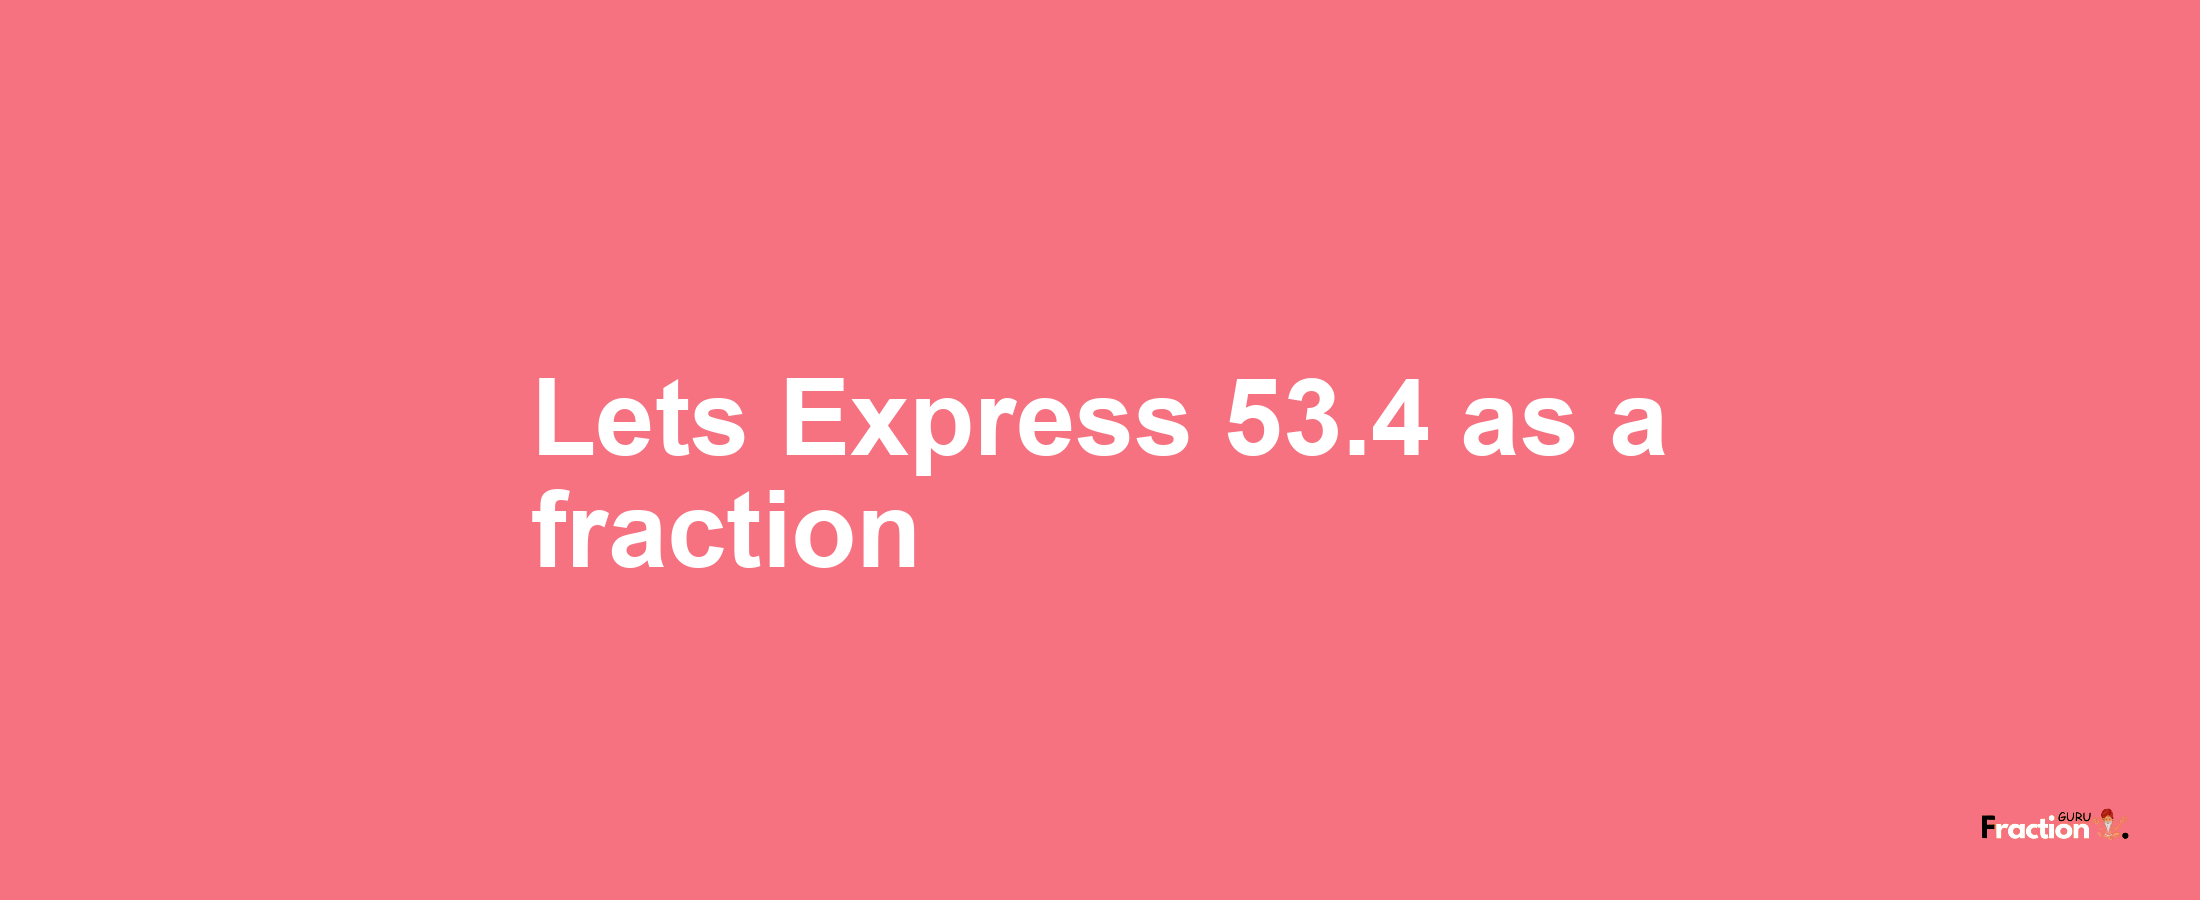 Lets Express 53.4 as afraction